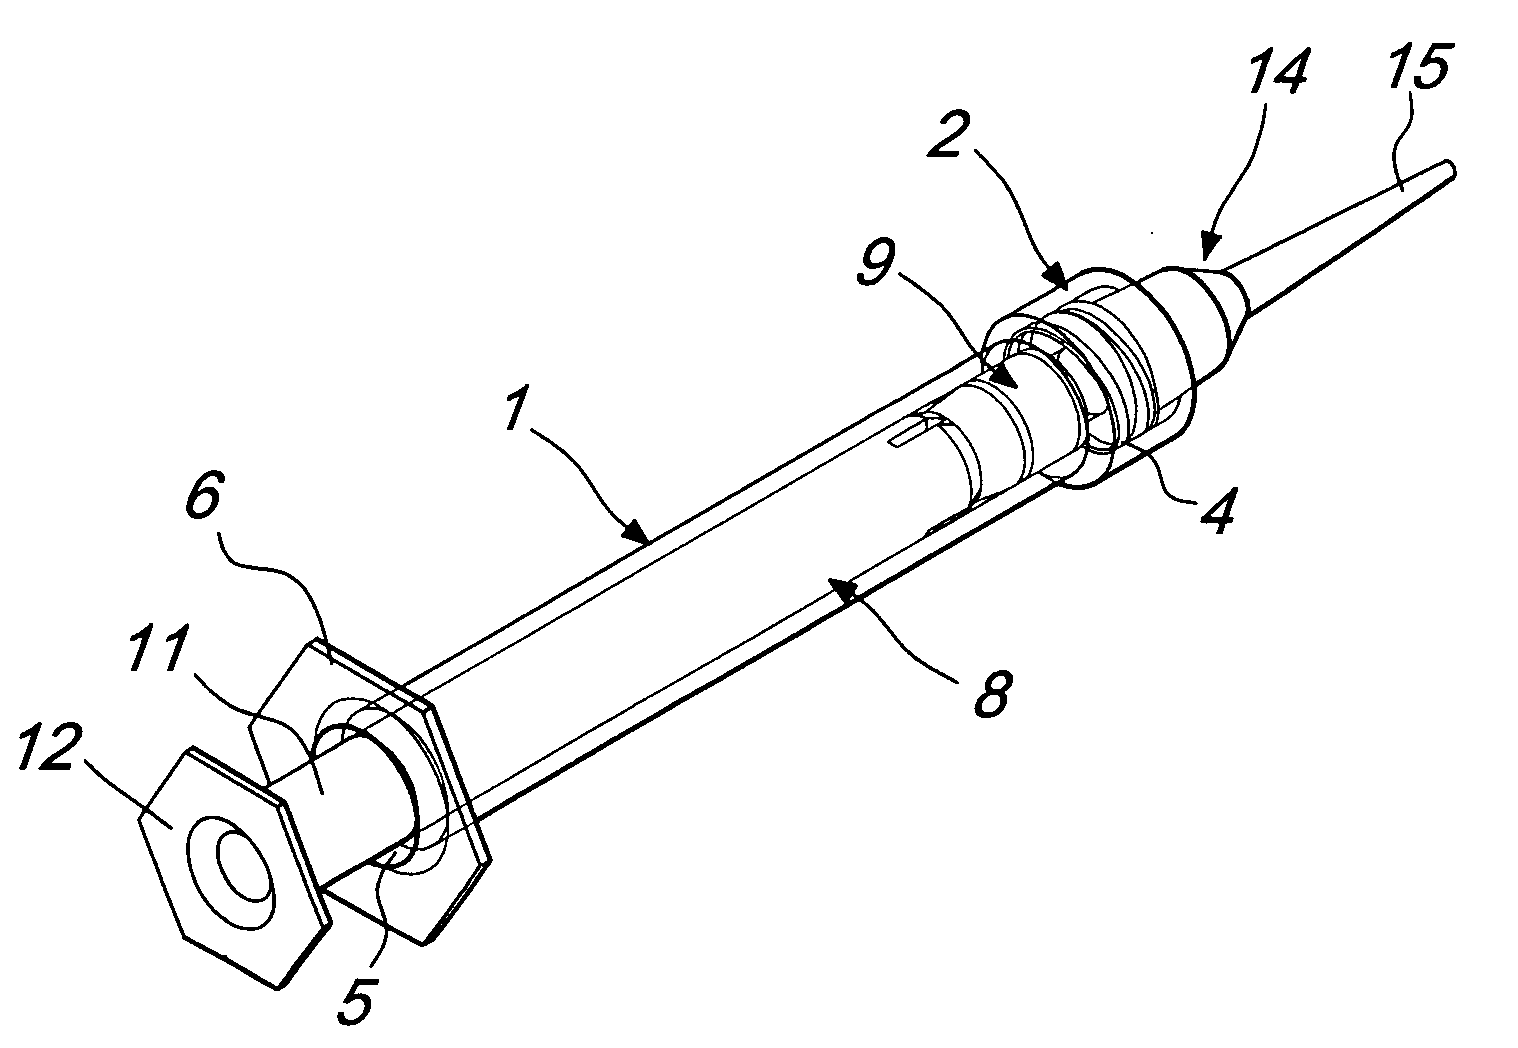 Method, Device And Kit Particularly For Applying A Cosmetic Product